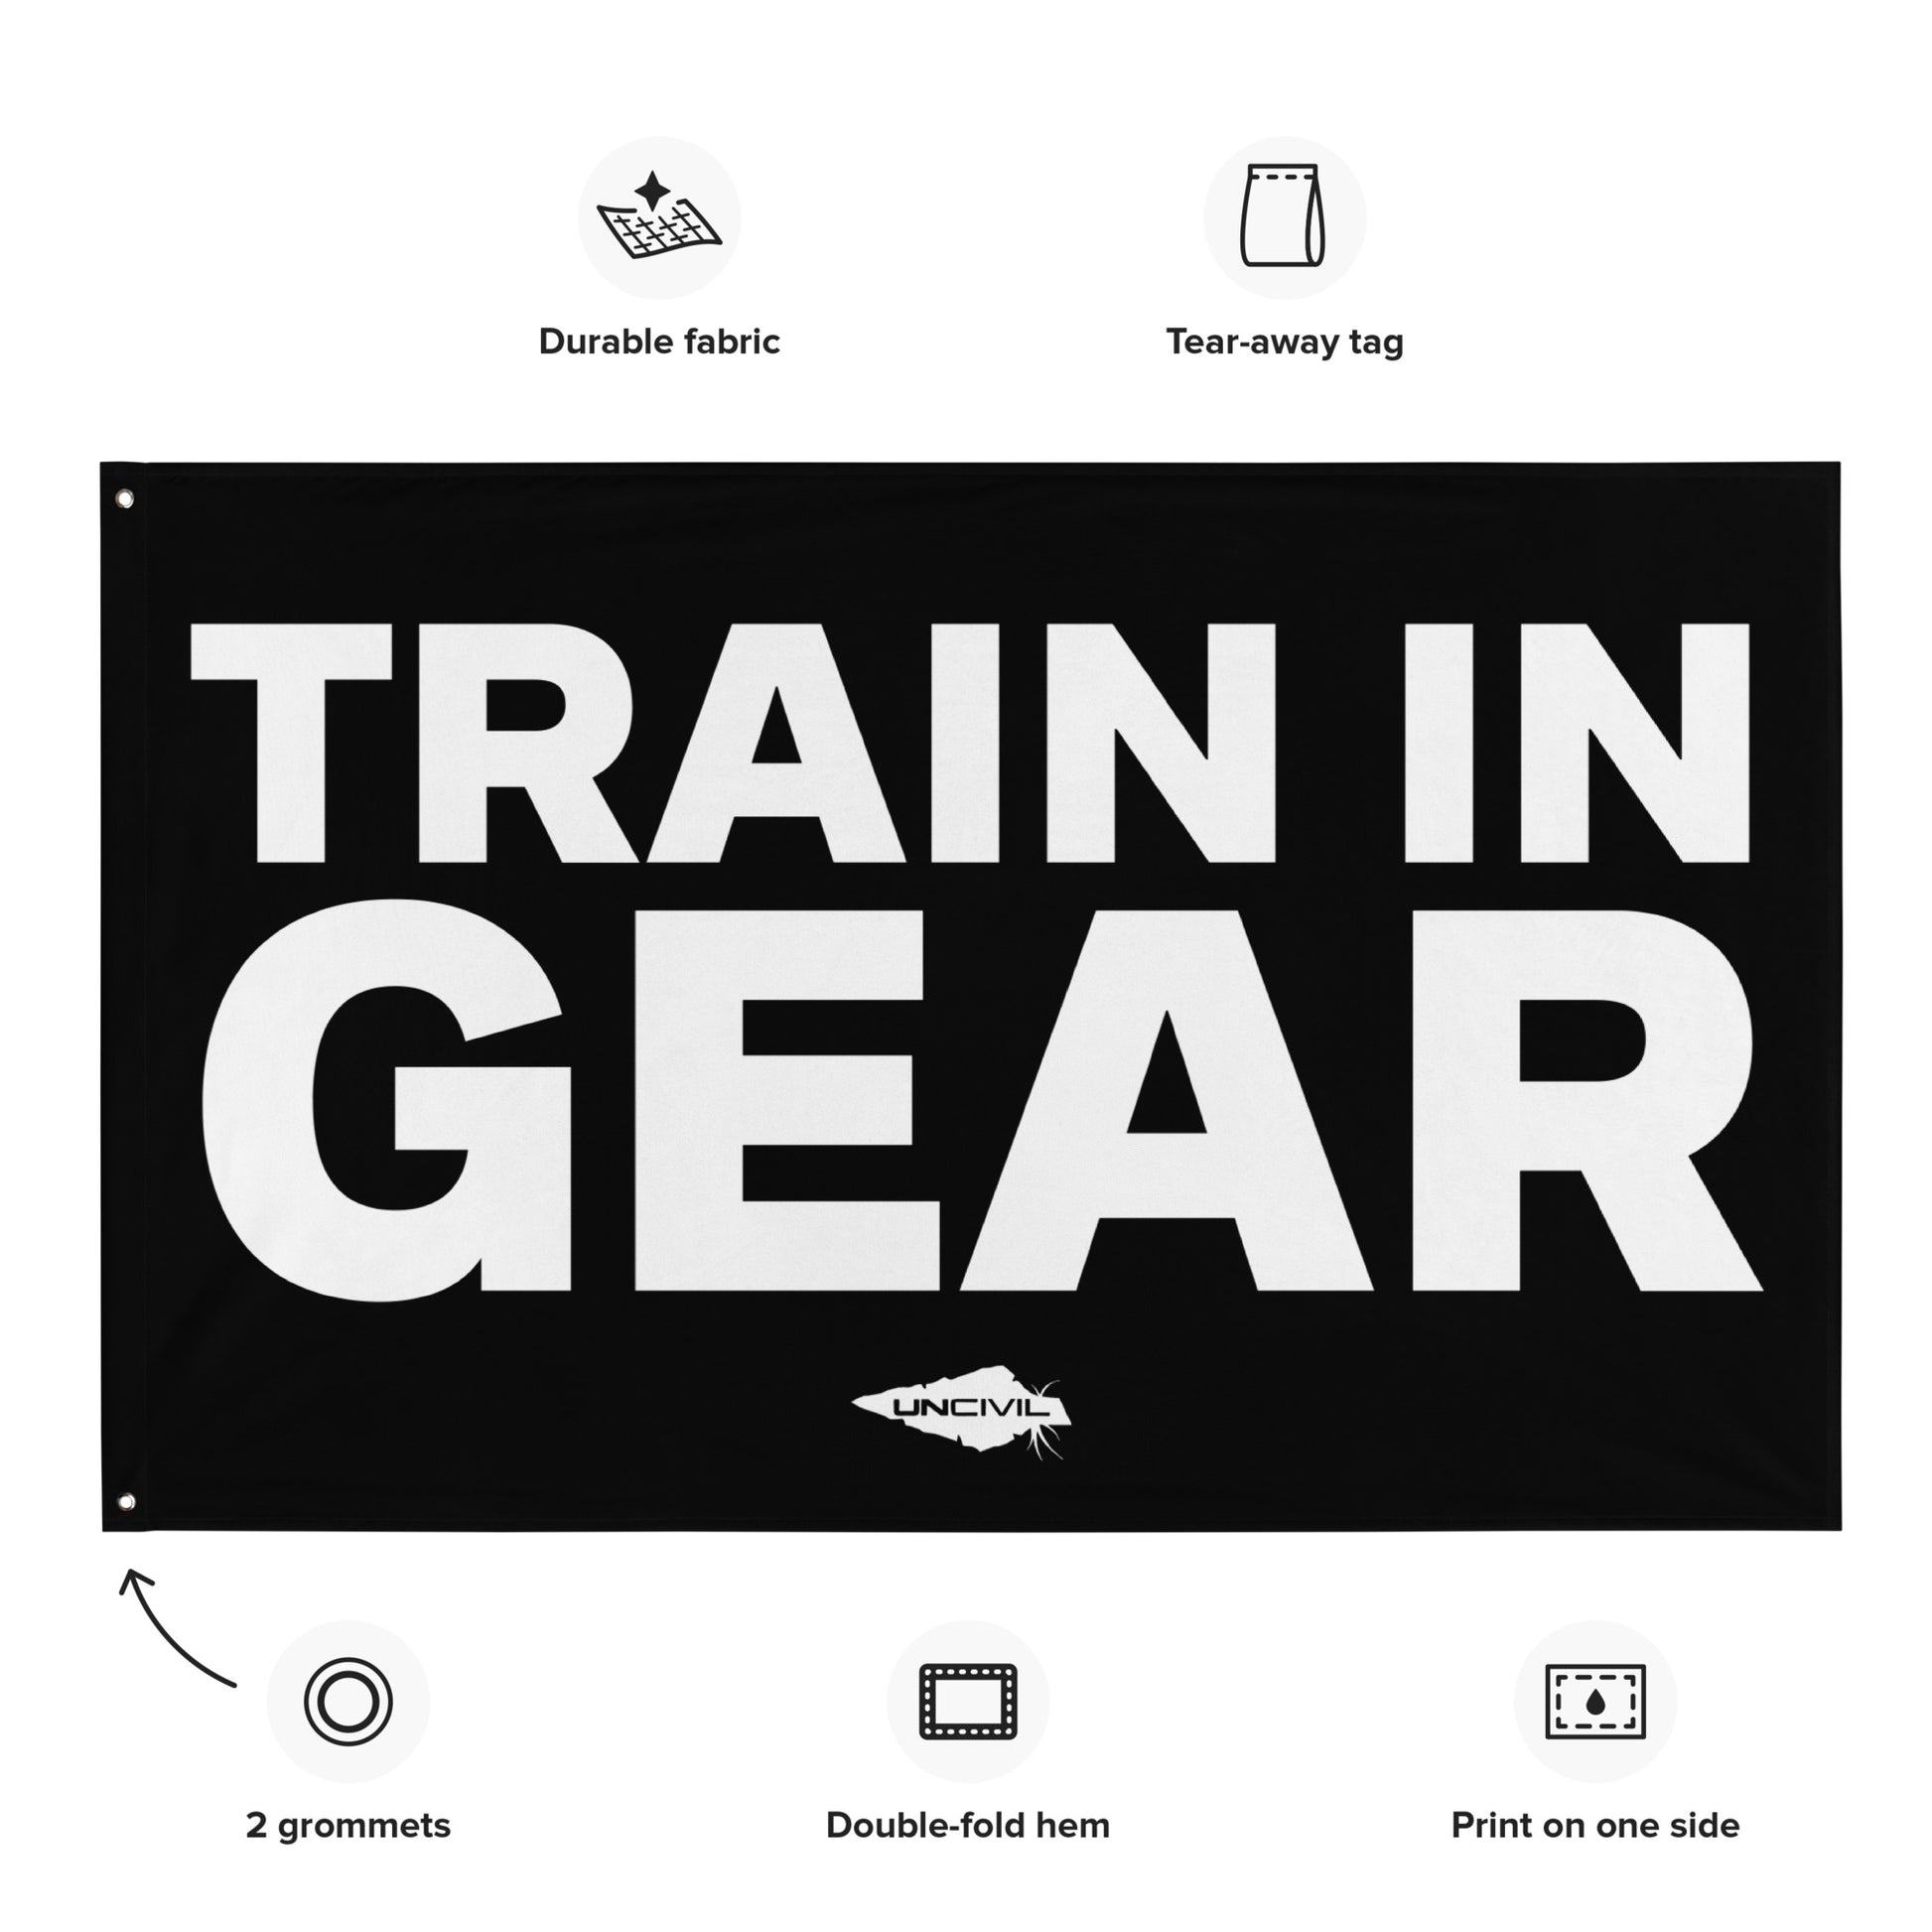 Train in Gear Flag 5x3 flag. Made for Firefighters, military, and first responders. Black and White flag with the UNCIVIL spear. 